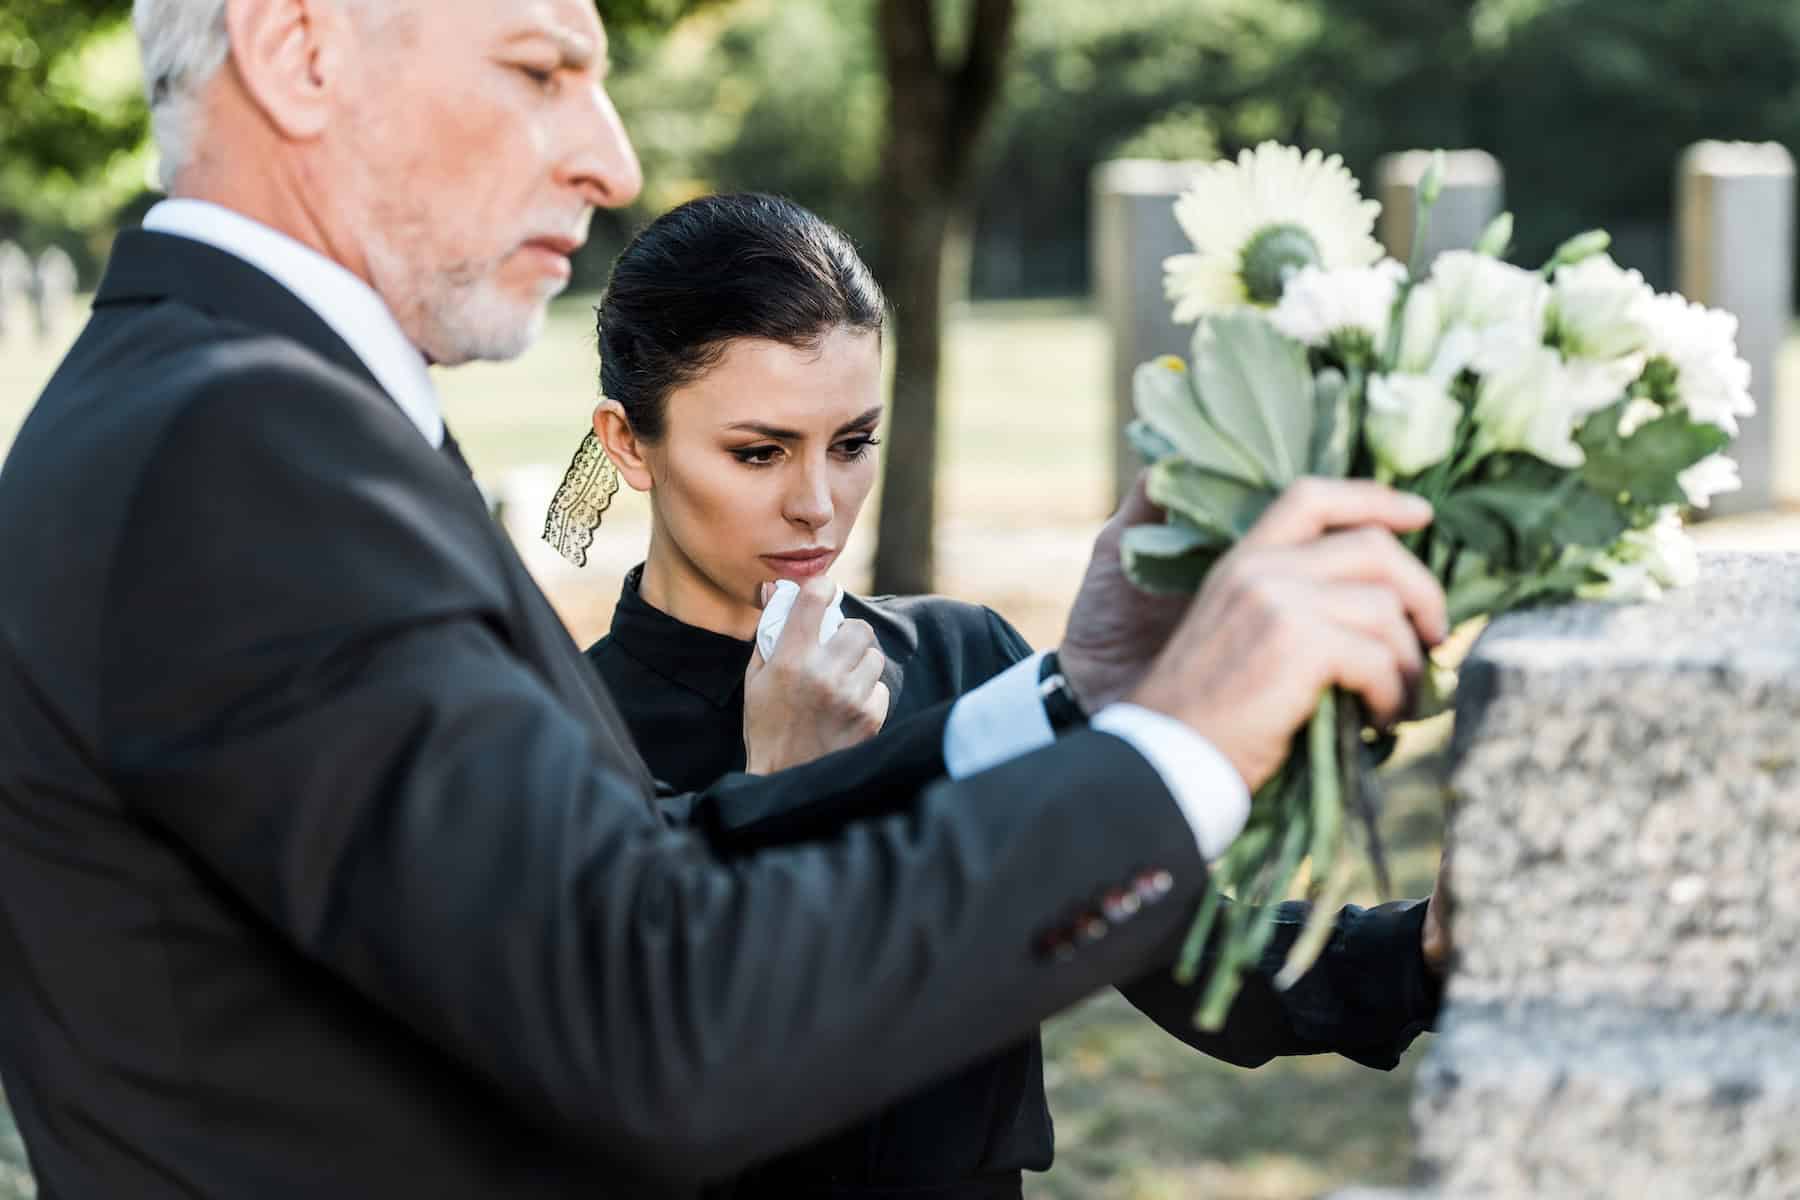 Important Questions to Ask Funeral Directors